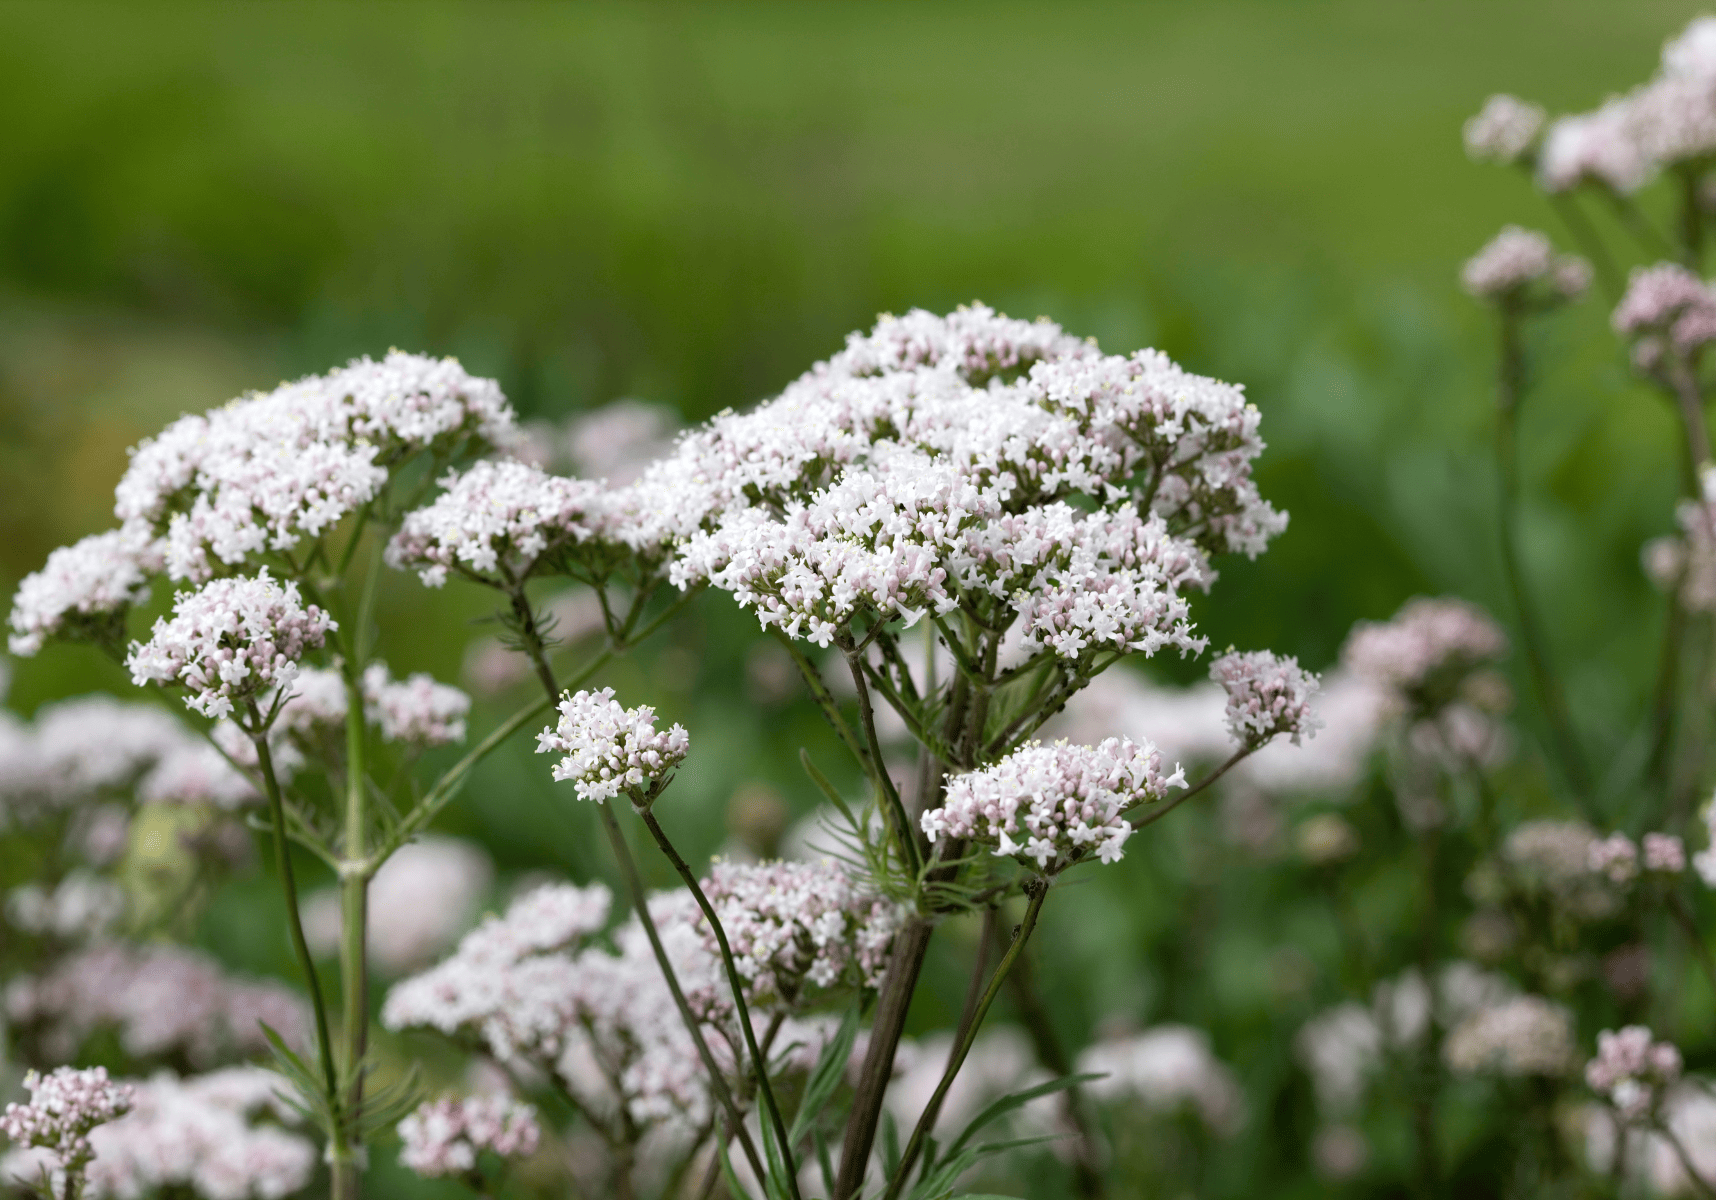 Can Valerian Help with Anxiety?